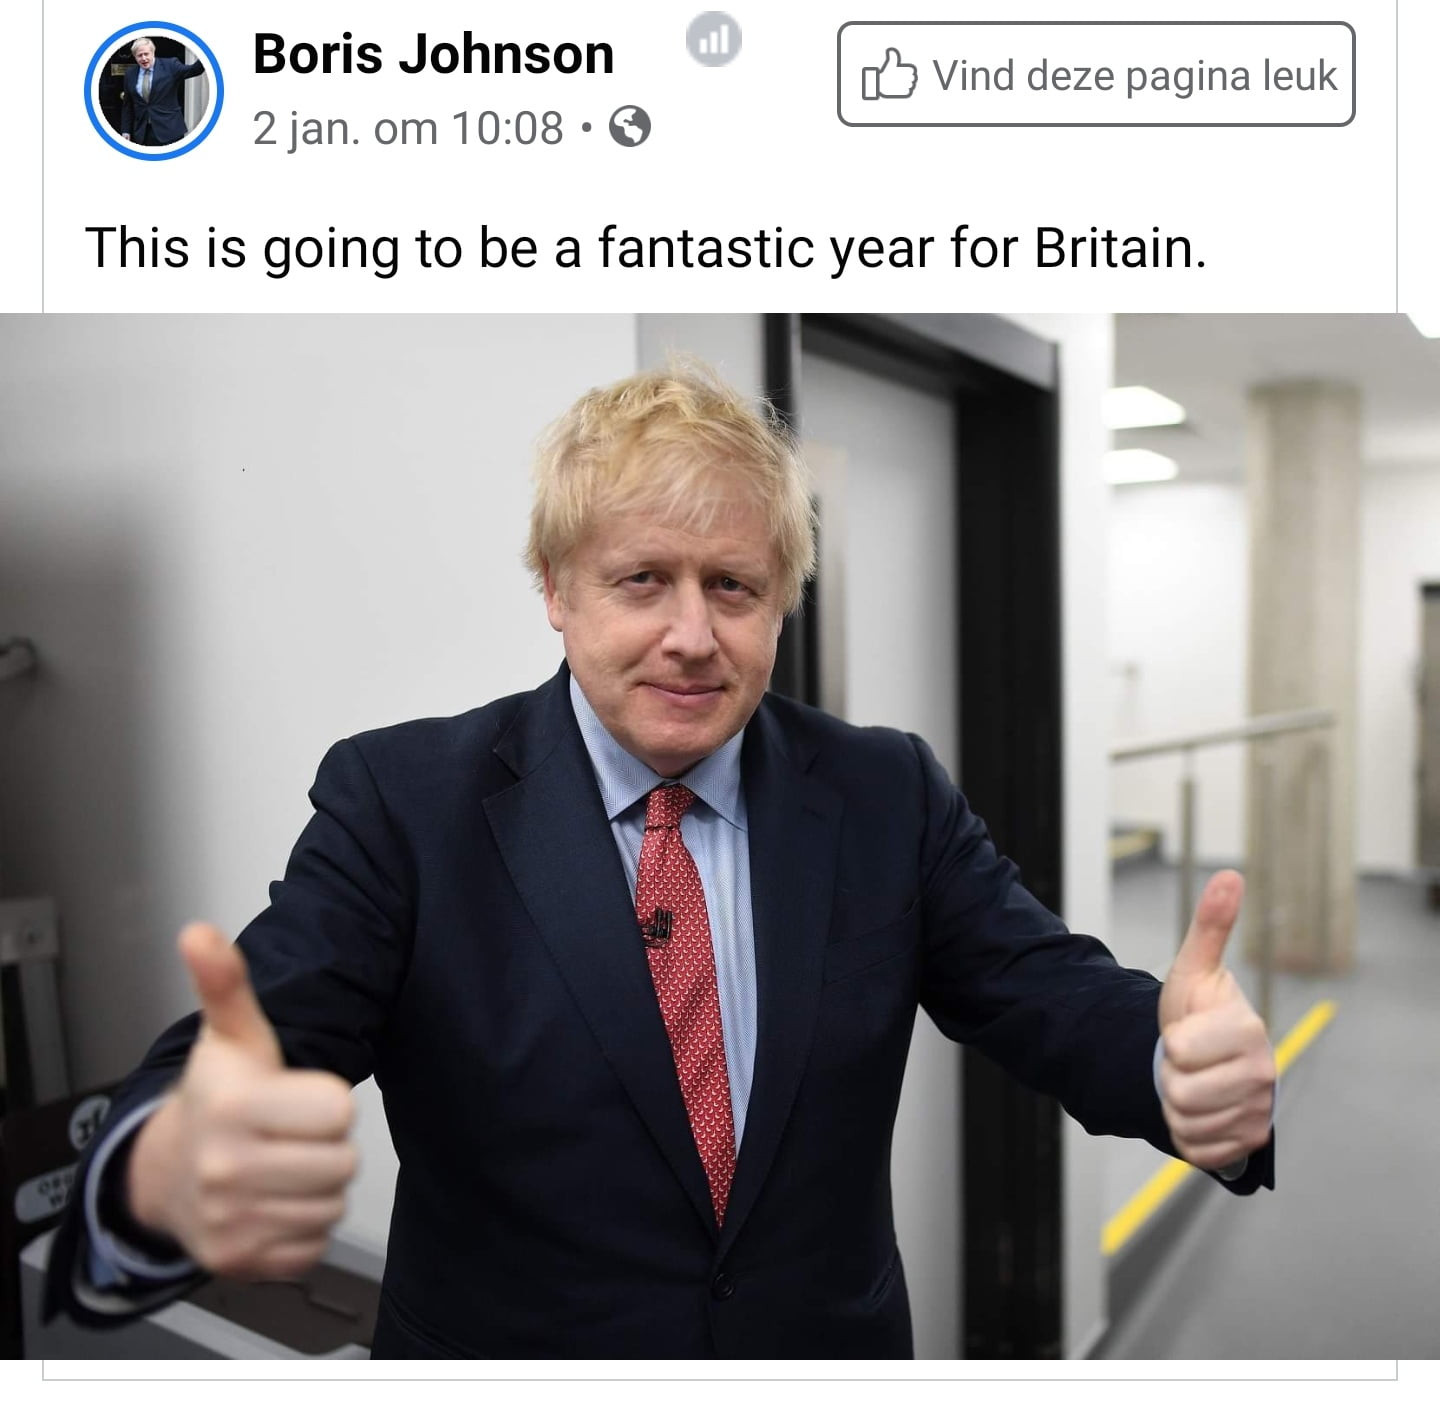 boi is johnson eb vind drze pagina ibuk  jan. om       tais is going to be a fantastic year for britain